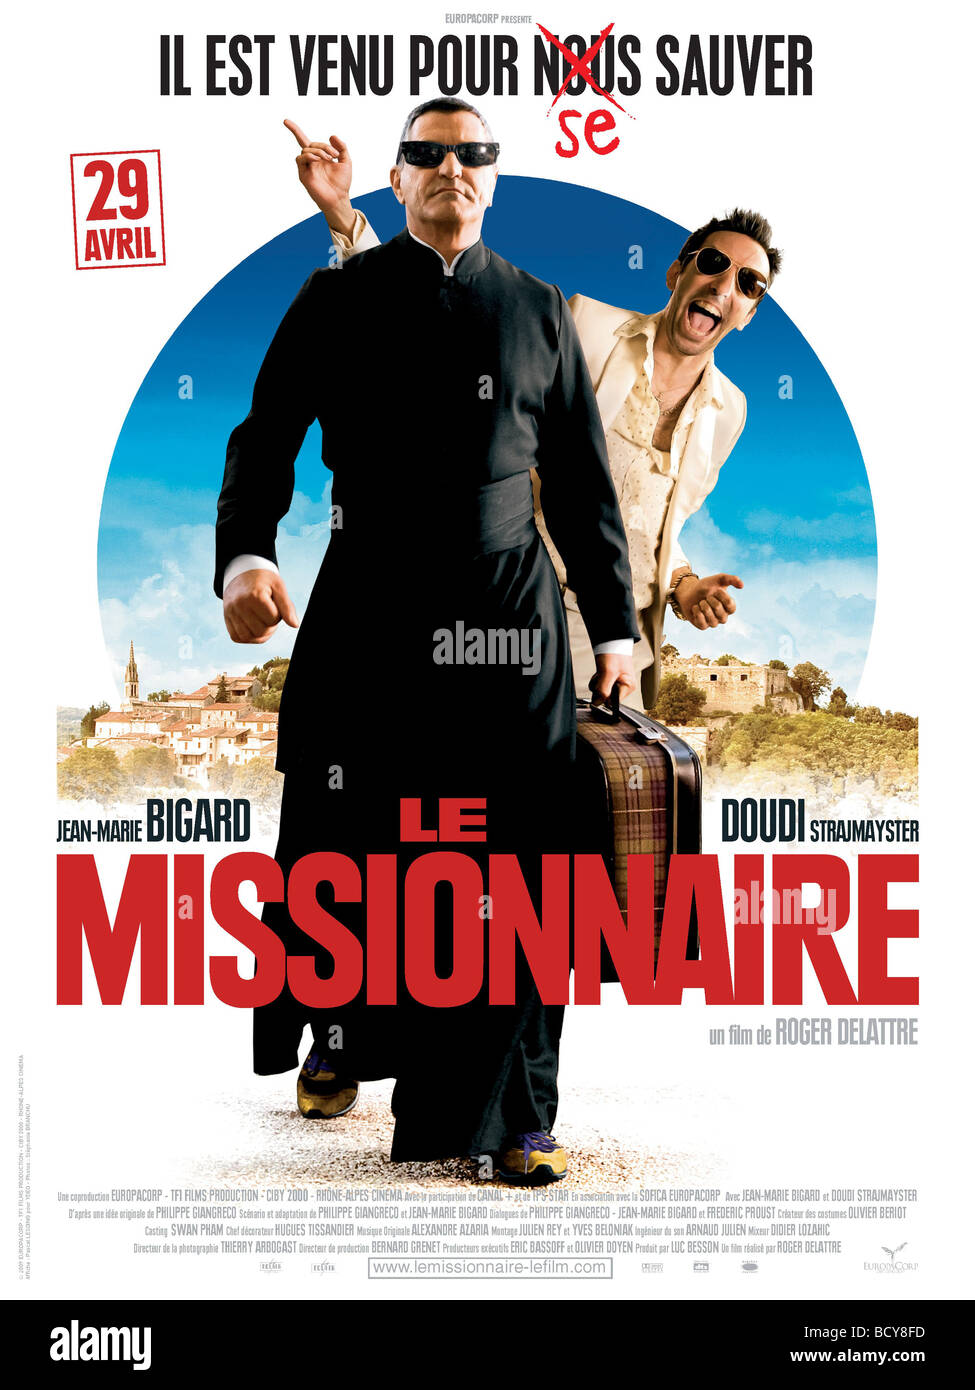 Le Missionnaire Year : 2009 France Director : Roger Delattre Jean-Marie Bigard, David Strajmayster Movie poster Stock Photo